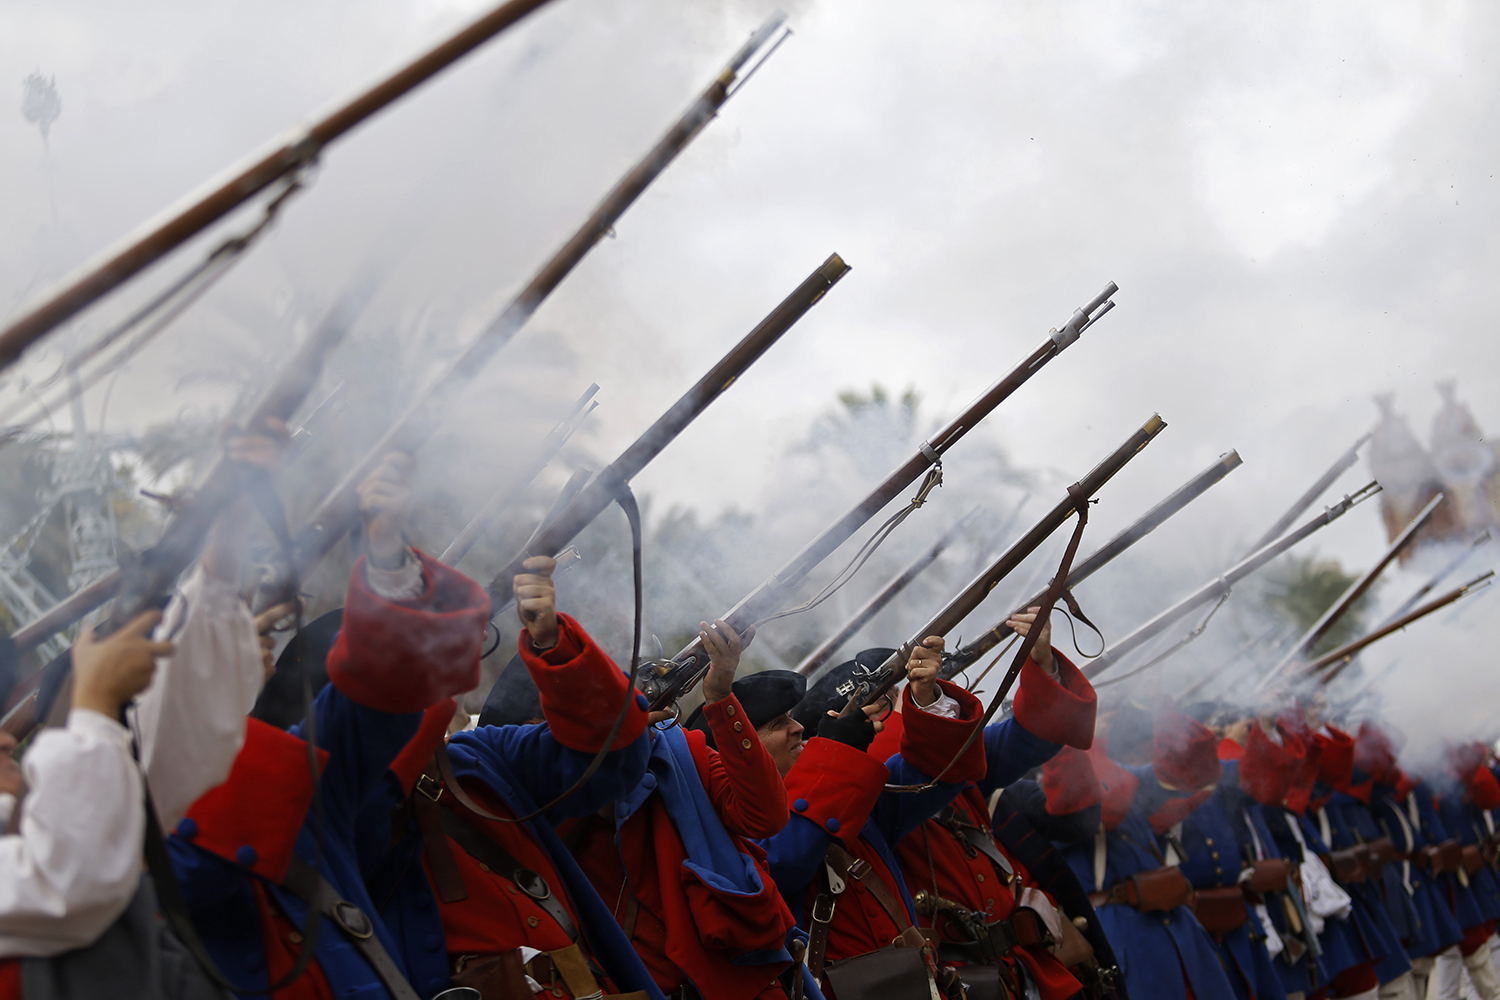 Men dressed as Catalan soldiers from 1714 perform during a rally calling for the independence of Catalonia, in Barcelona, Spain, Friday, Sept. 11, 2015. Advocates of independence for Spain's northeastern region of Catalonia on Friday launched their campaign to try to elect a majority of secessionists in regional parliamentary elections on Sept. 27. (AP Photo/Francisco Seco)